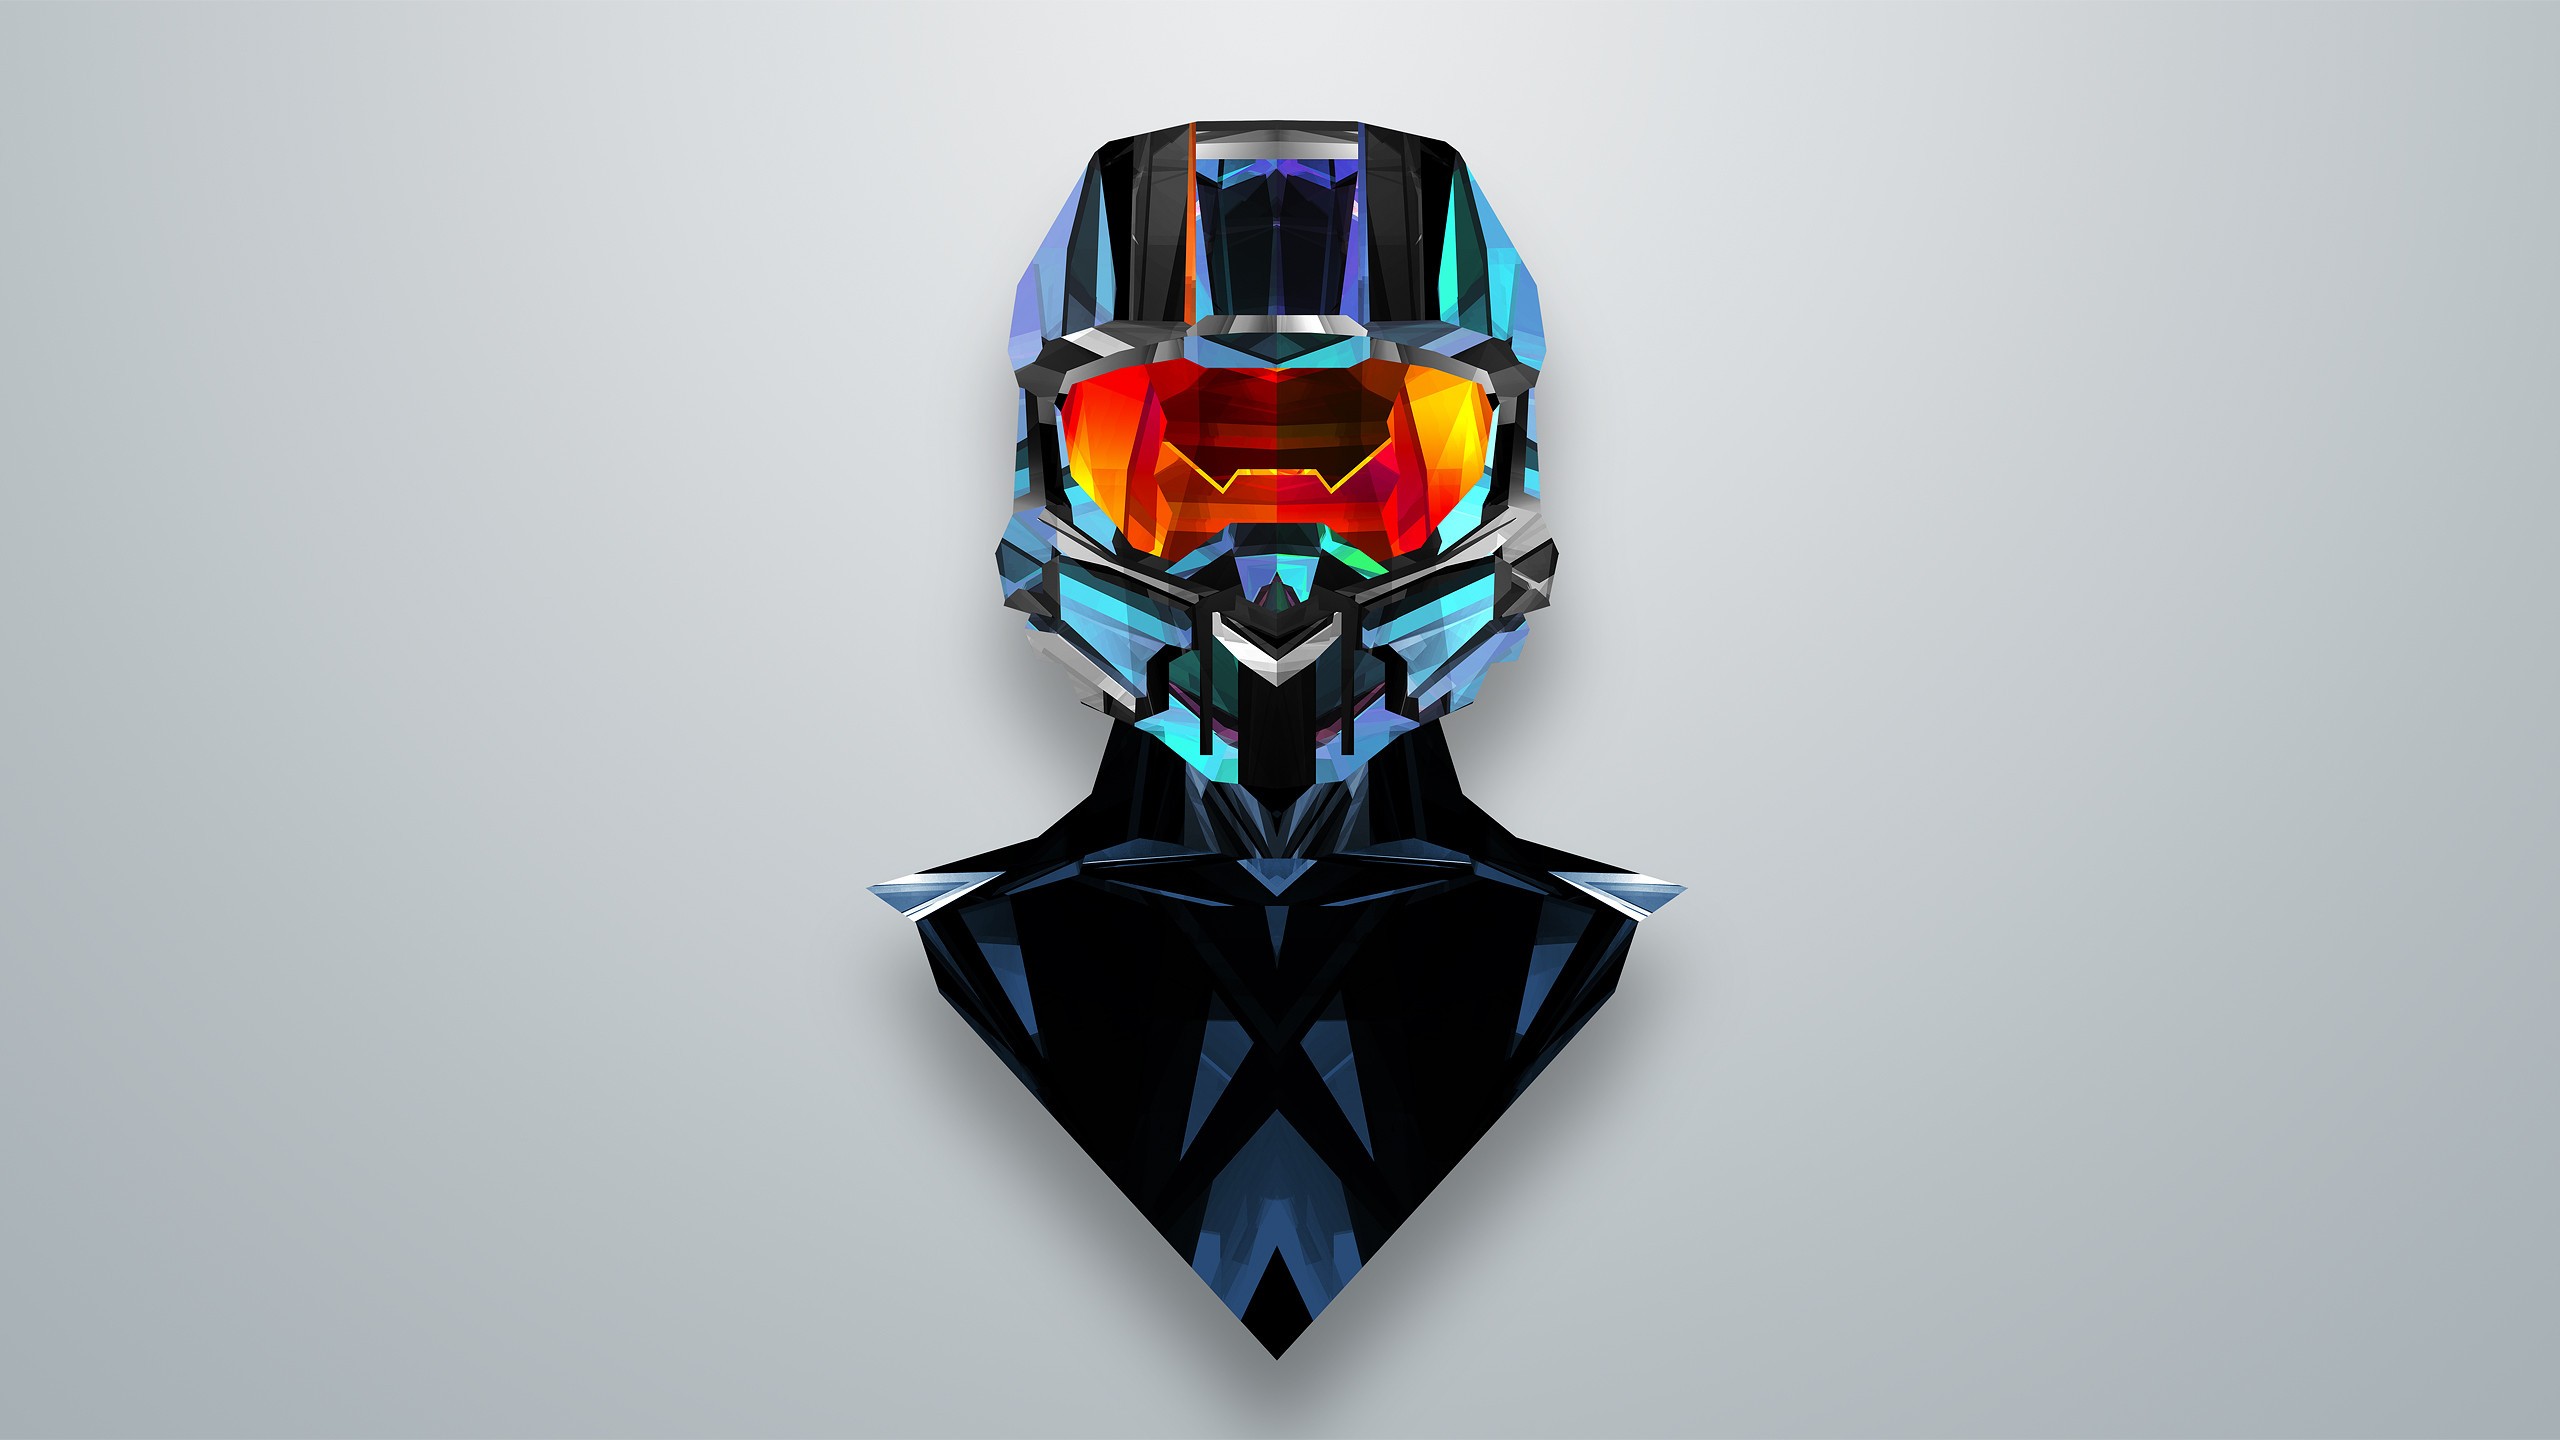 General 2560x1440 abstract Justin Maller Halo (game) artwork simple background video games PC gaming video game art 3D Abstract Master Chief (Halo) video game characters